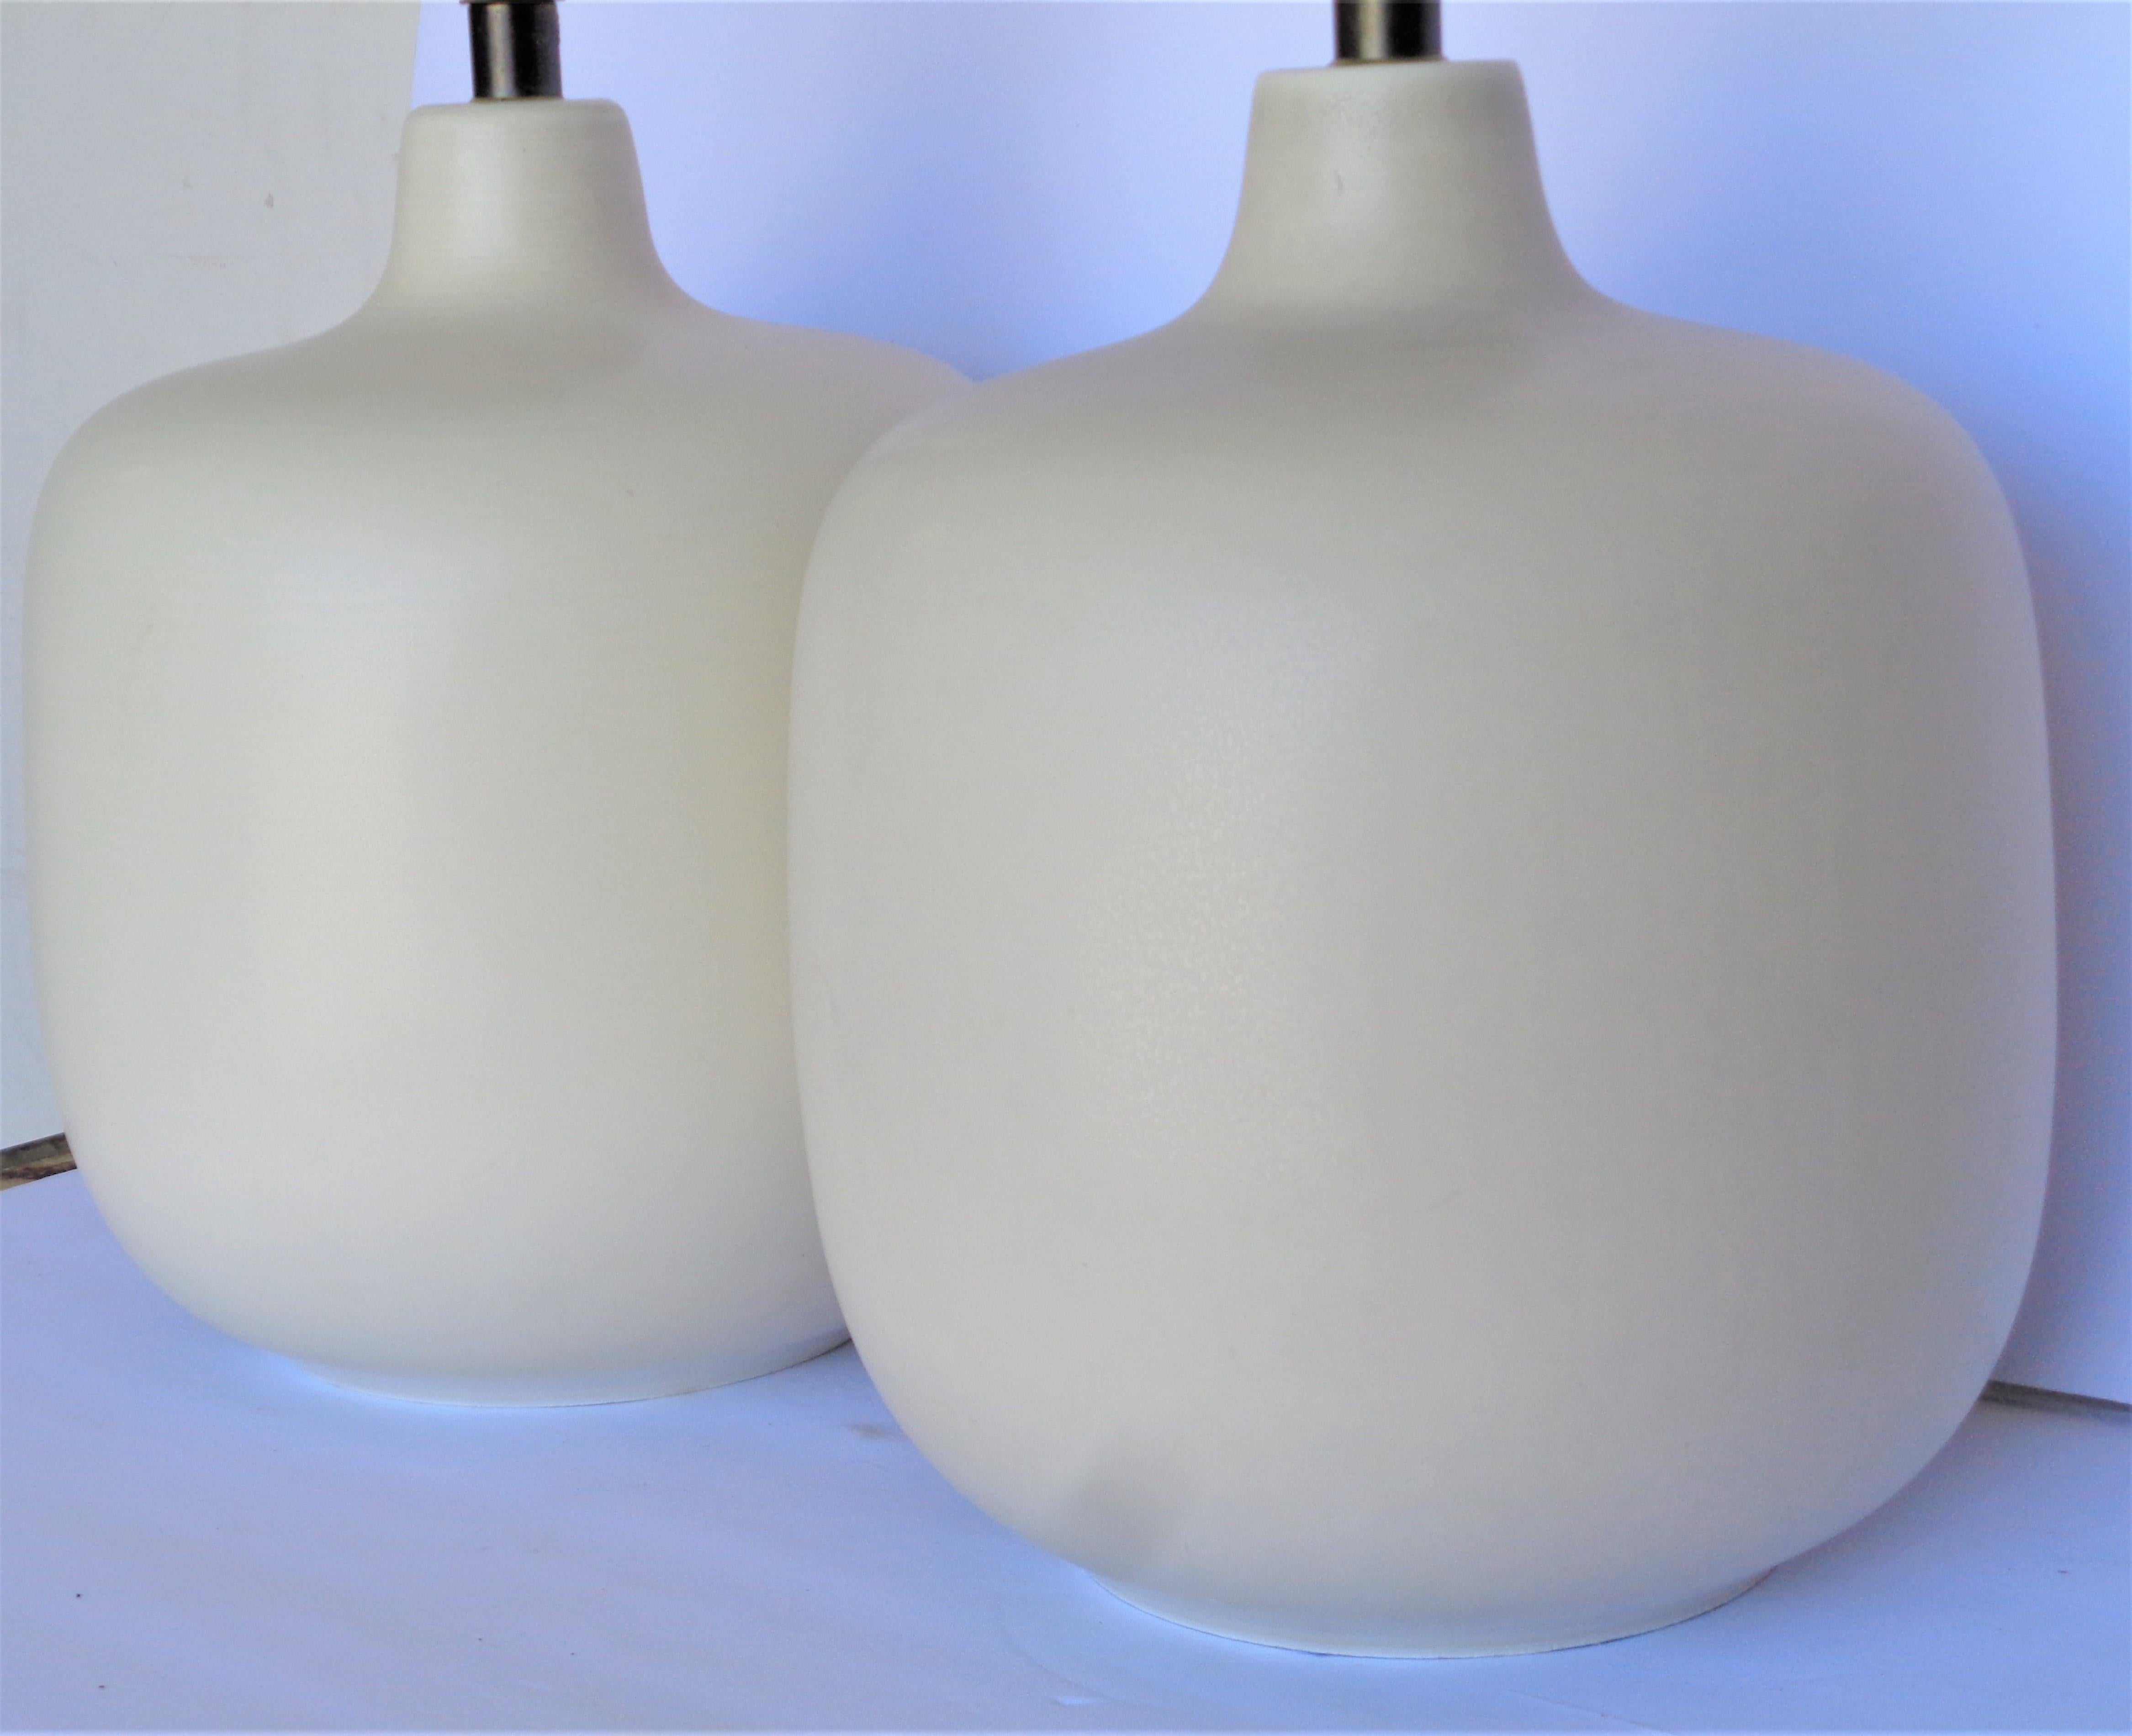 A pair of stoneware table lamps in the original soft eggshell white subtlety textured glaze by Lotte and Gunnar Bostlund, Denmark. Lamps measure 13 inches high to top of ceramic, 16 inches high to top of electric socket, 10 inches wide, 10 inches